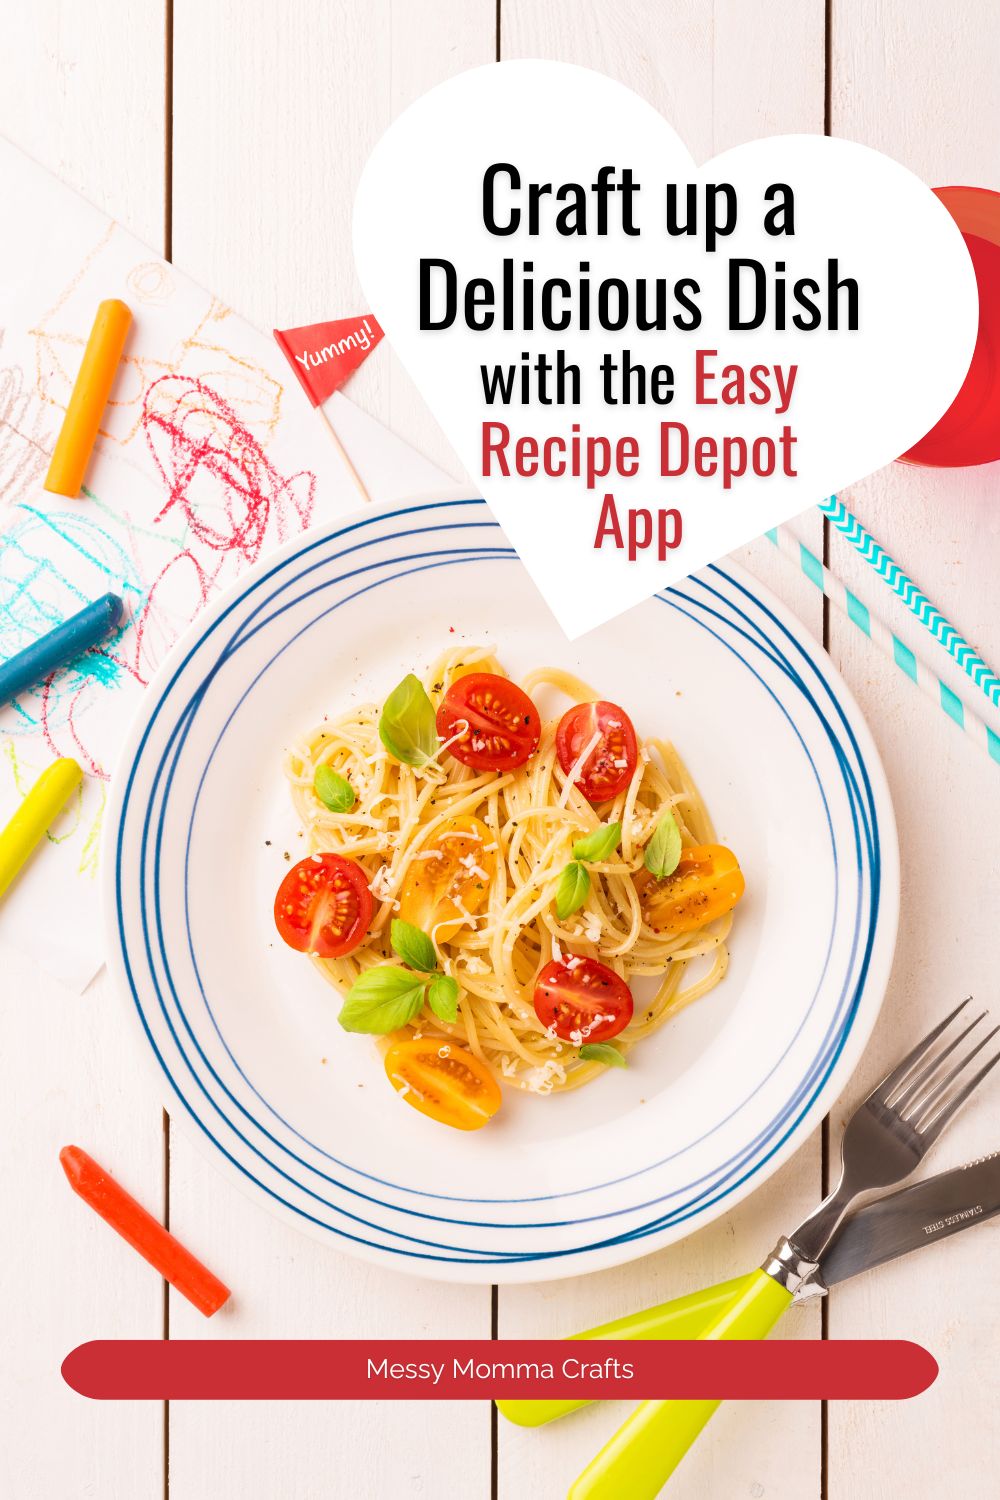 Craft up a delicious dish with the Easy Recipe Depot app.